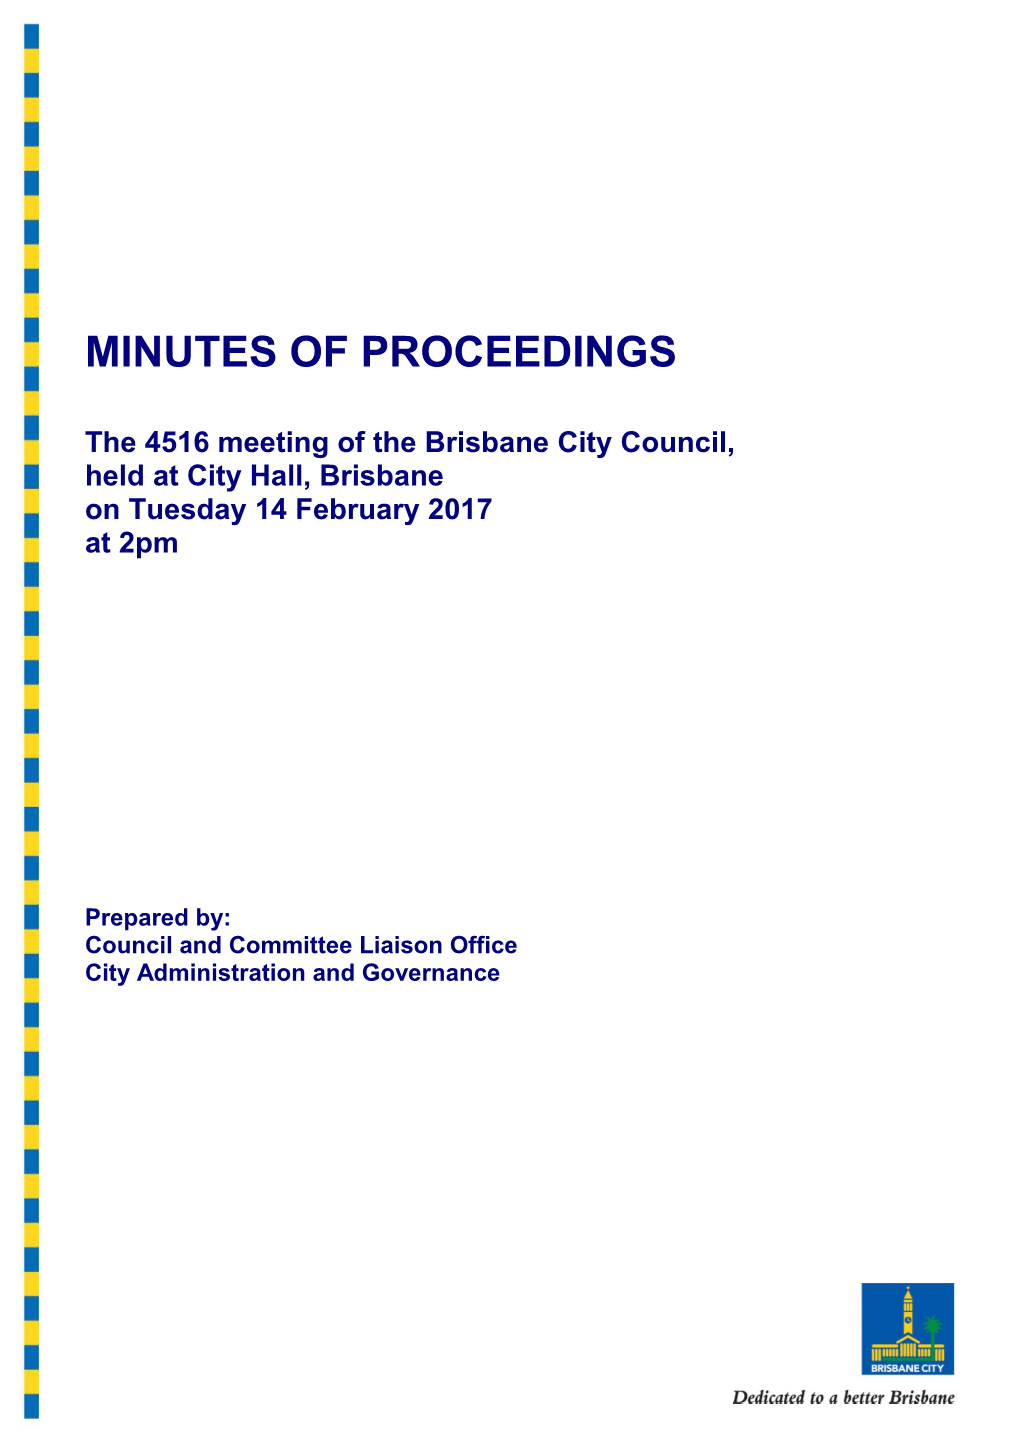 The 4516 Meeting of the Brisbane City Council